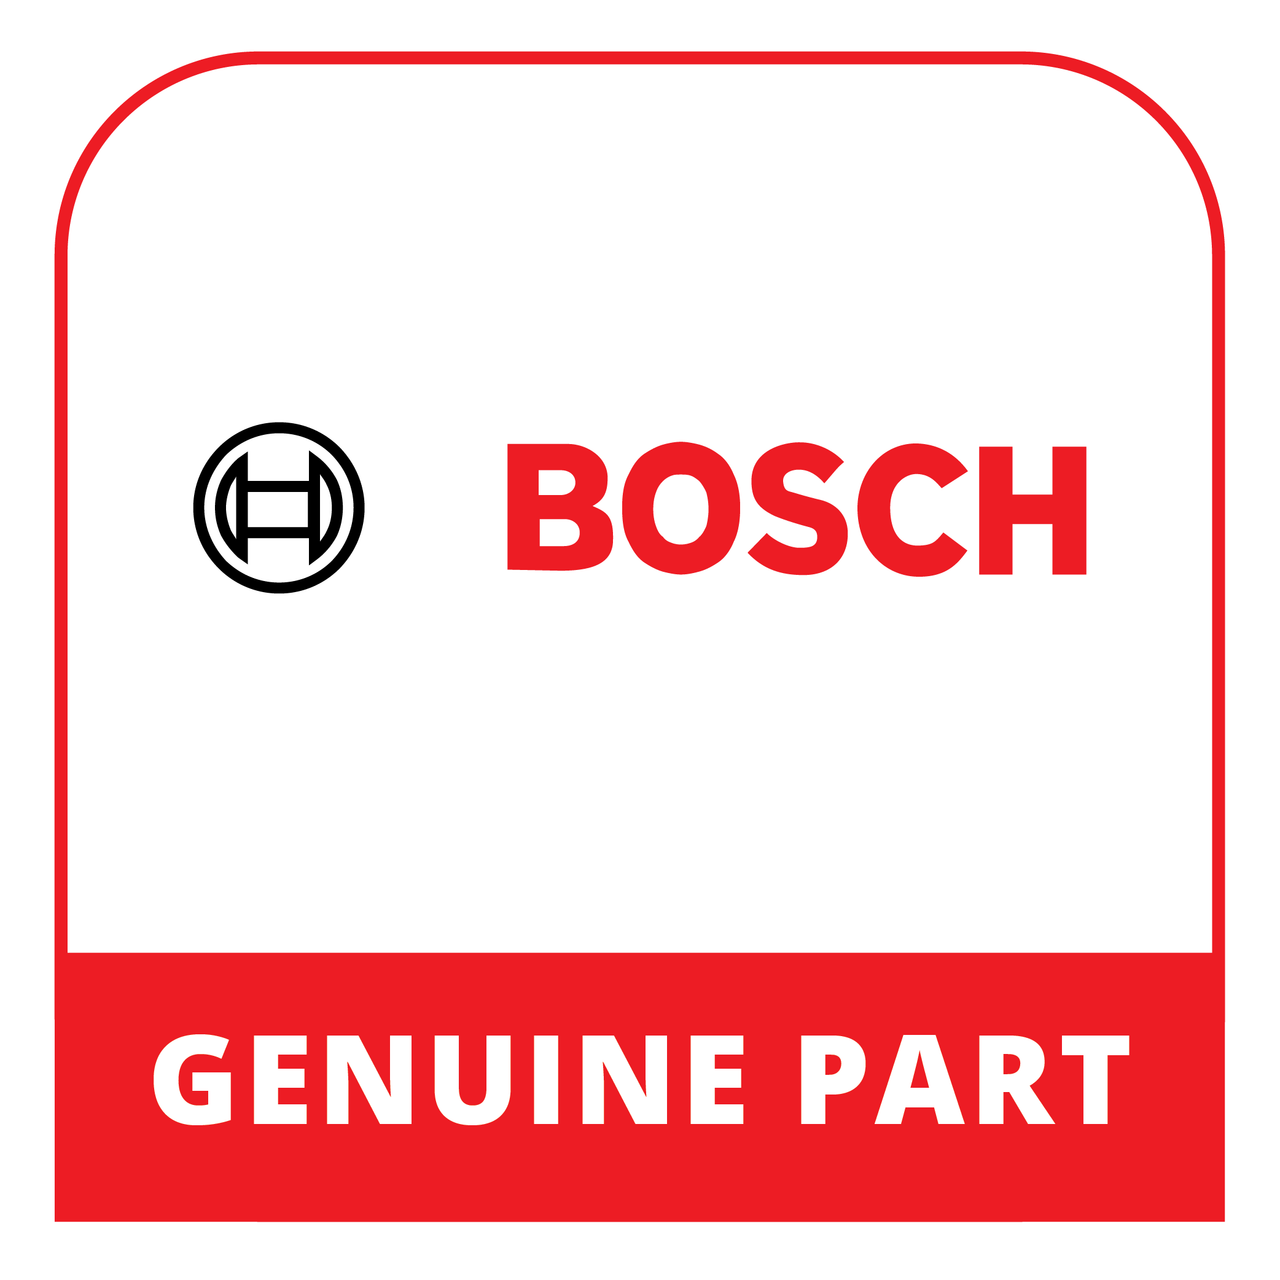 Bosch (Thermador) 23000921 - Duct - Genuine Bosch (Thermador) Part